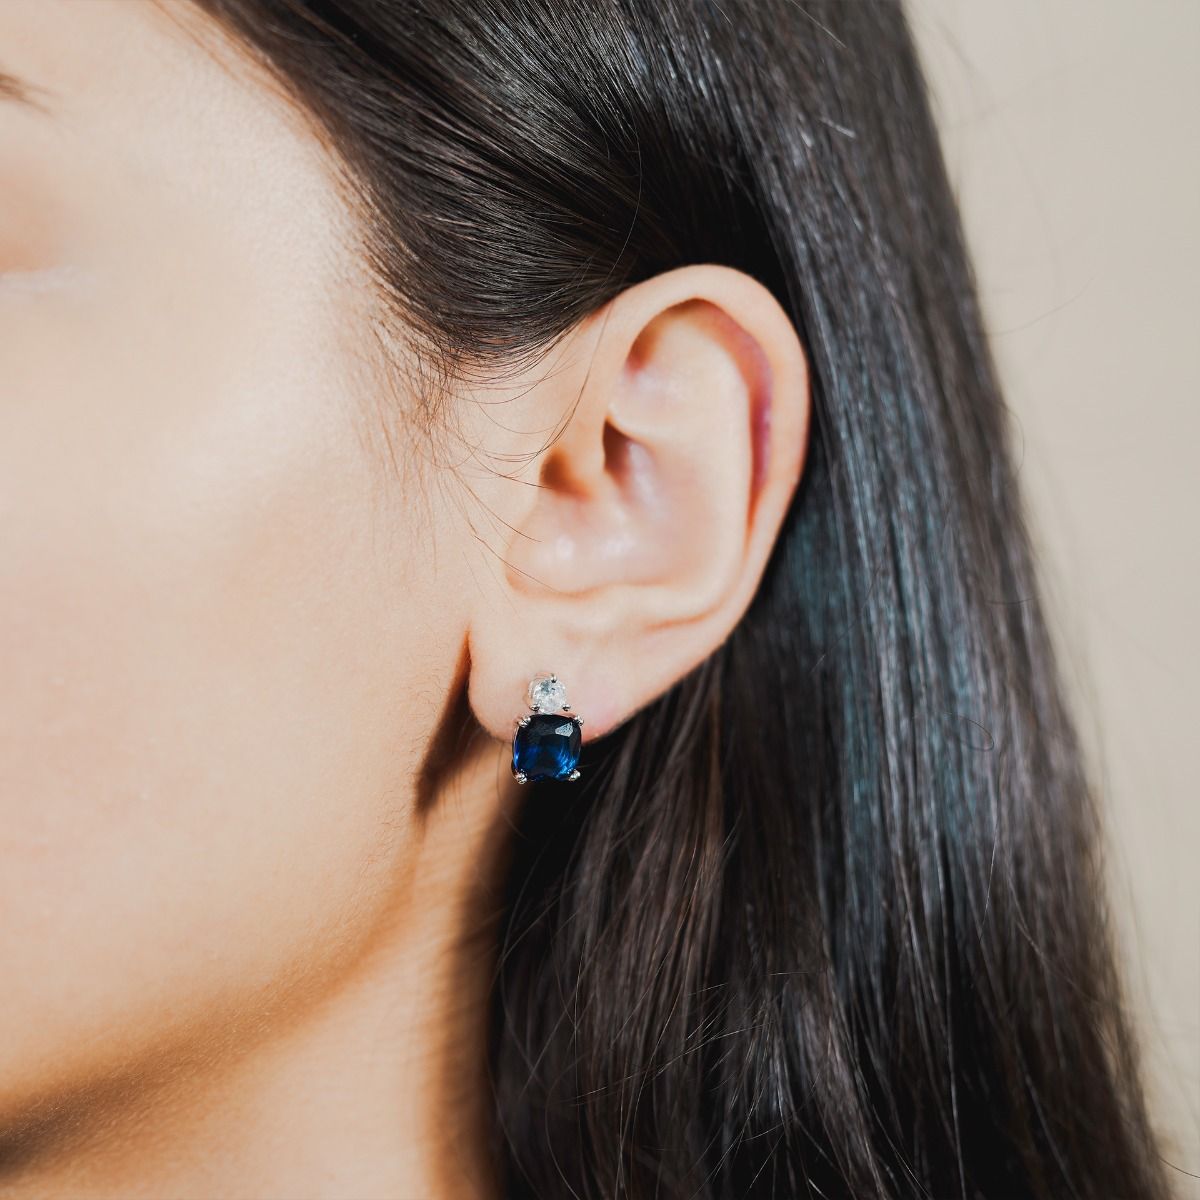 These show stopping stud earrings are set with a flawless brilliant cut cubic zirconia above a striking cushion cut Sapphire coloured stone. Wear to add timeless glamour to any look.